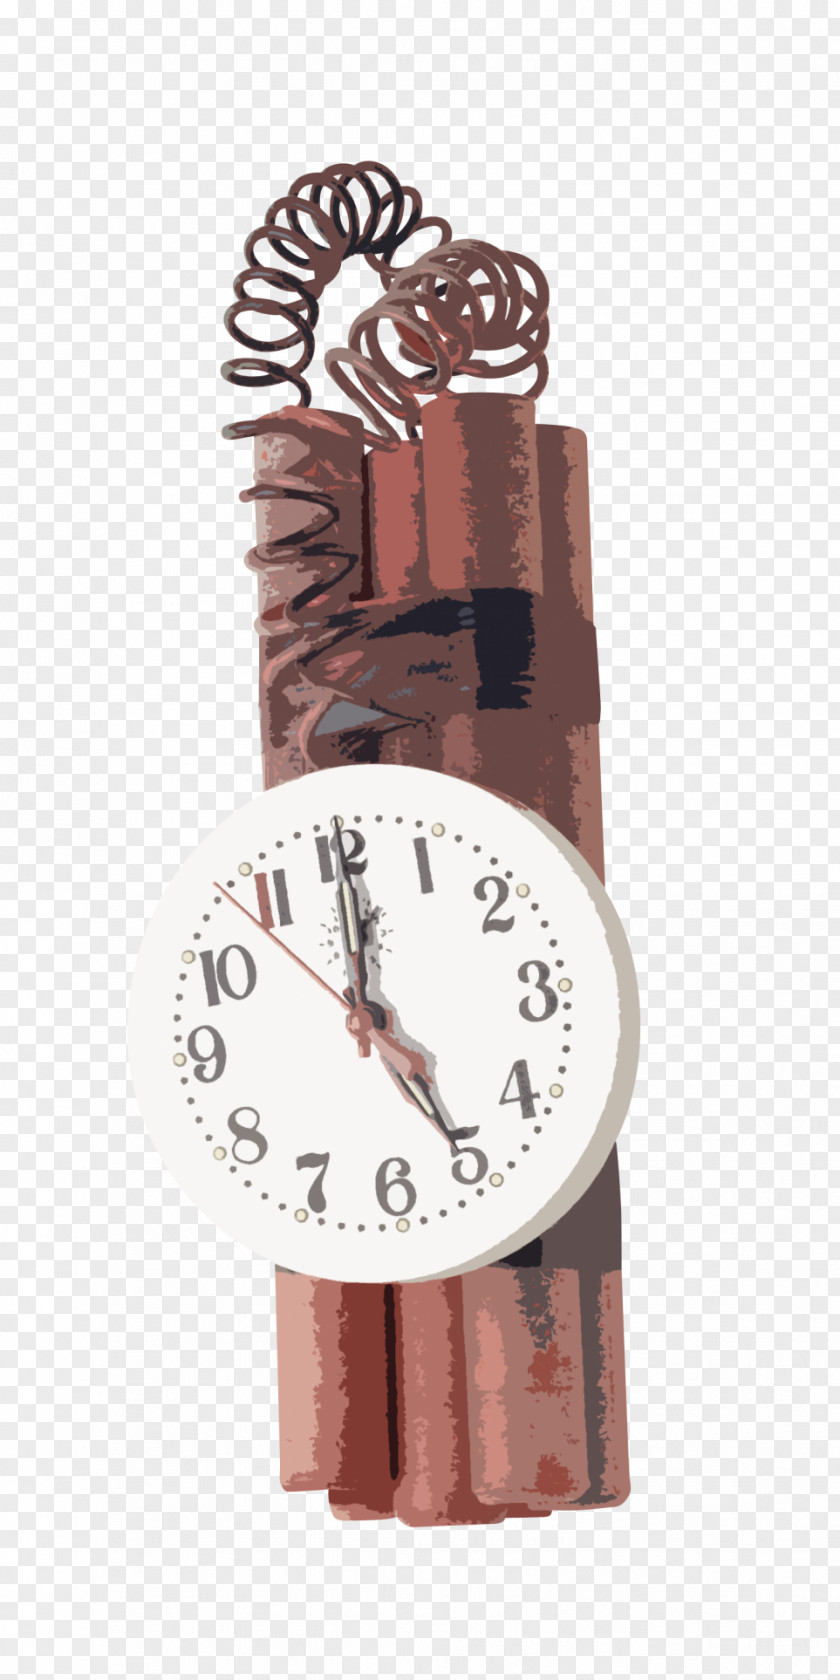 Time Bomb Image Clip Art PNG